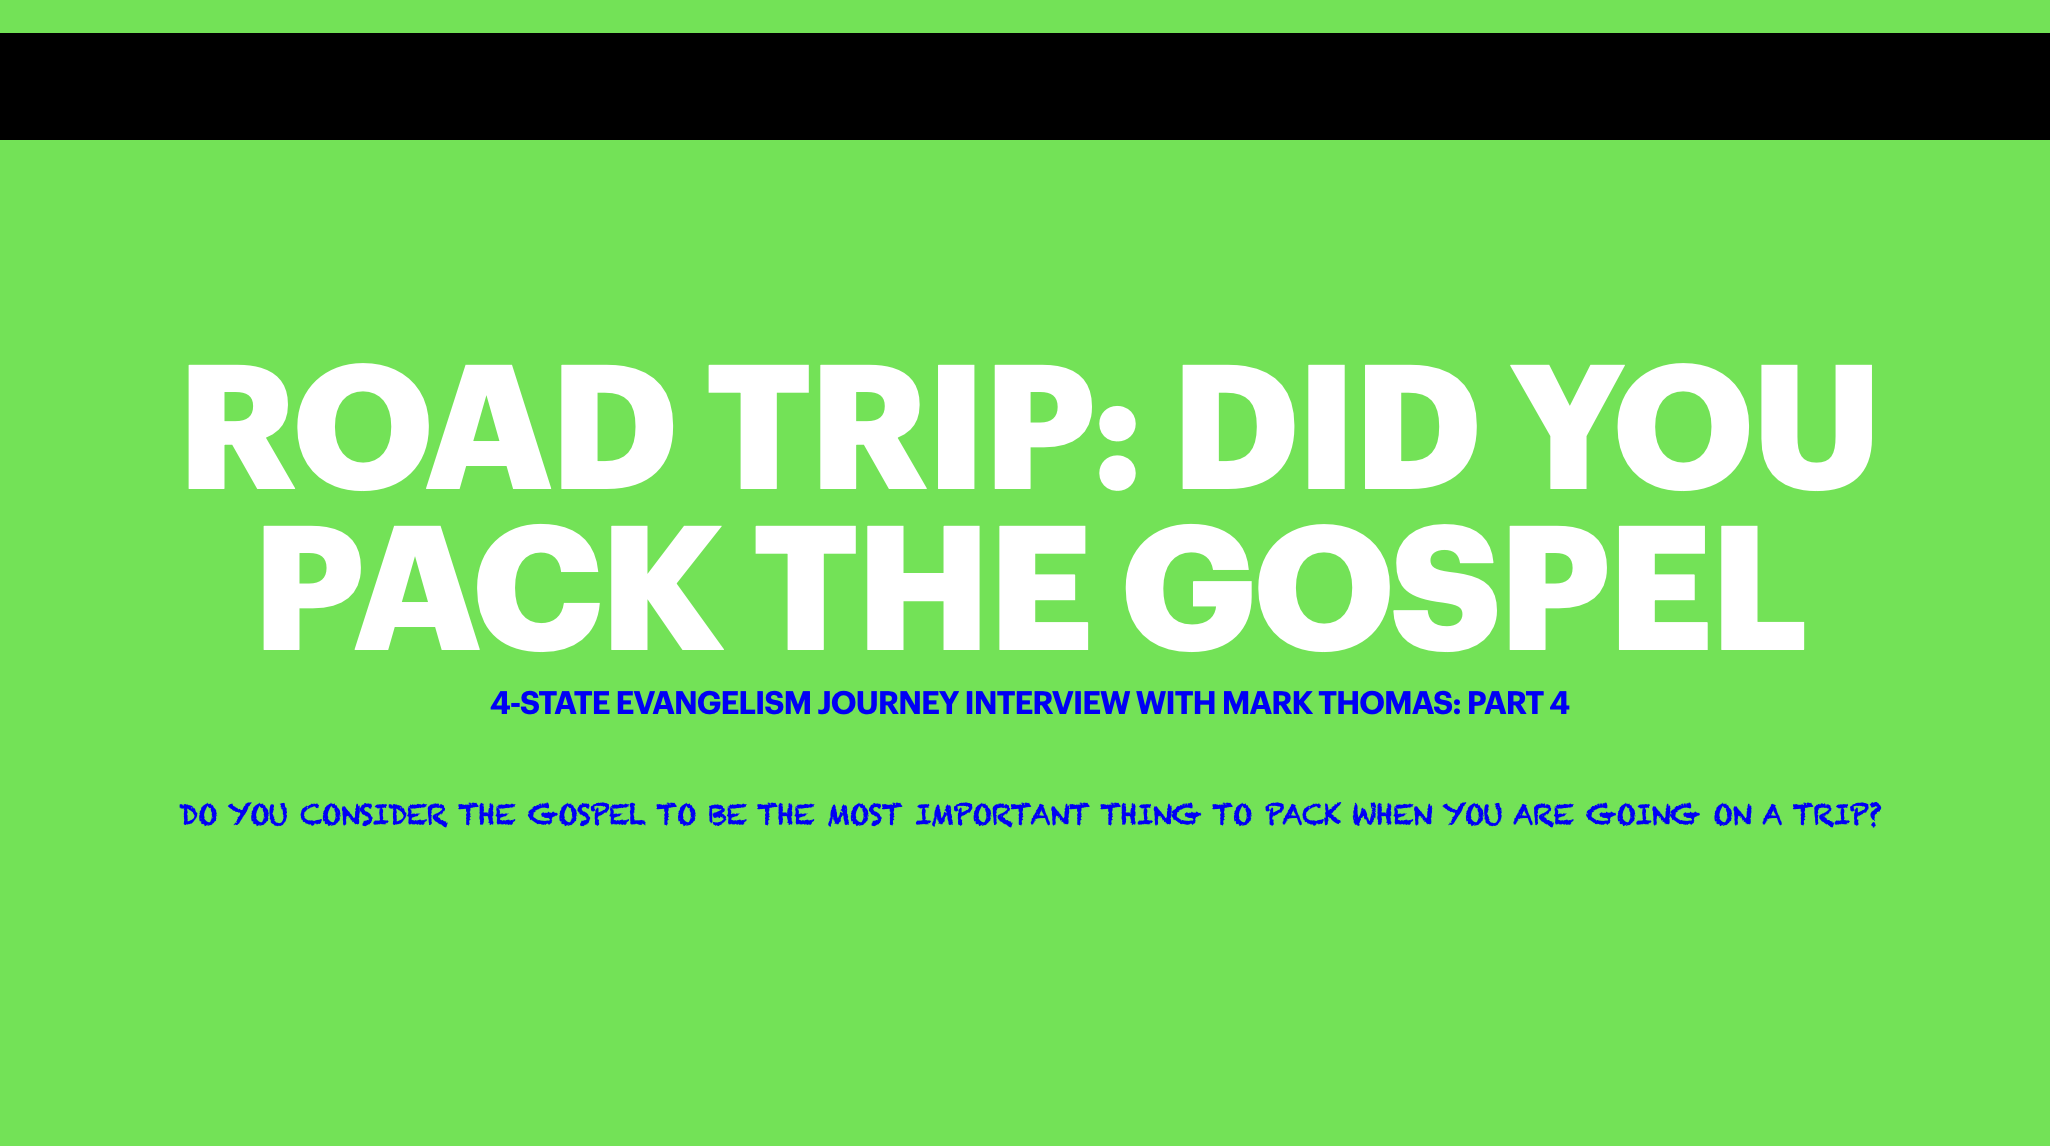 Road Trip: Did you pack the Gospel?, with Mark Thomas - Part 4